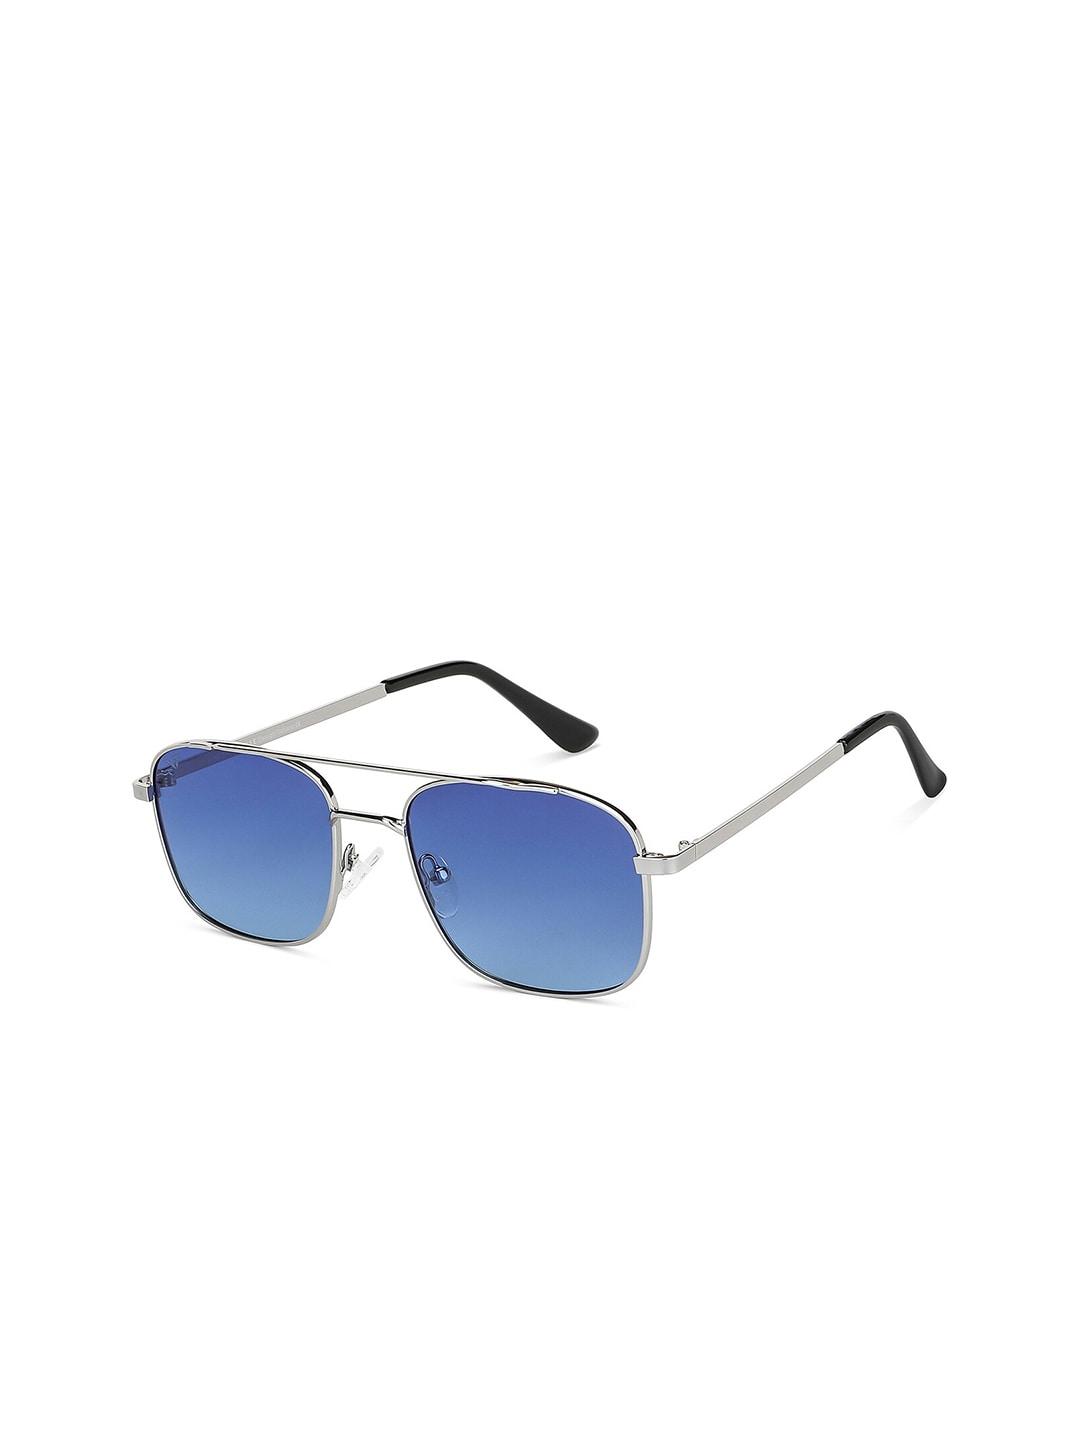 Vincent Chase Unisex Blue Lens & Silver-Toned Square Sunglasses with Polarised and UV Protected Lens